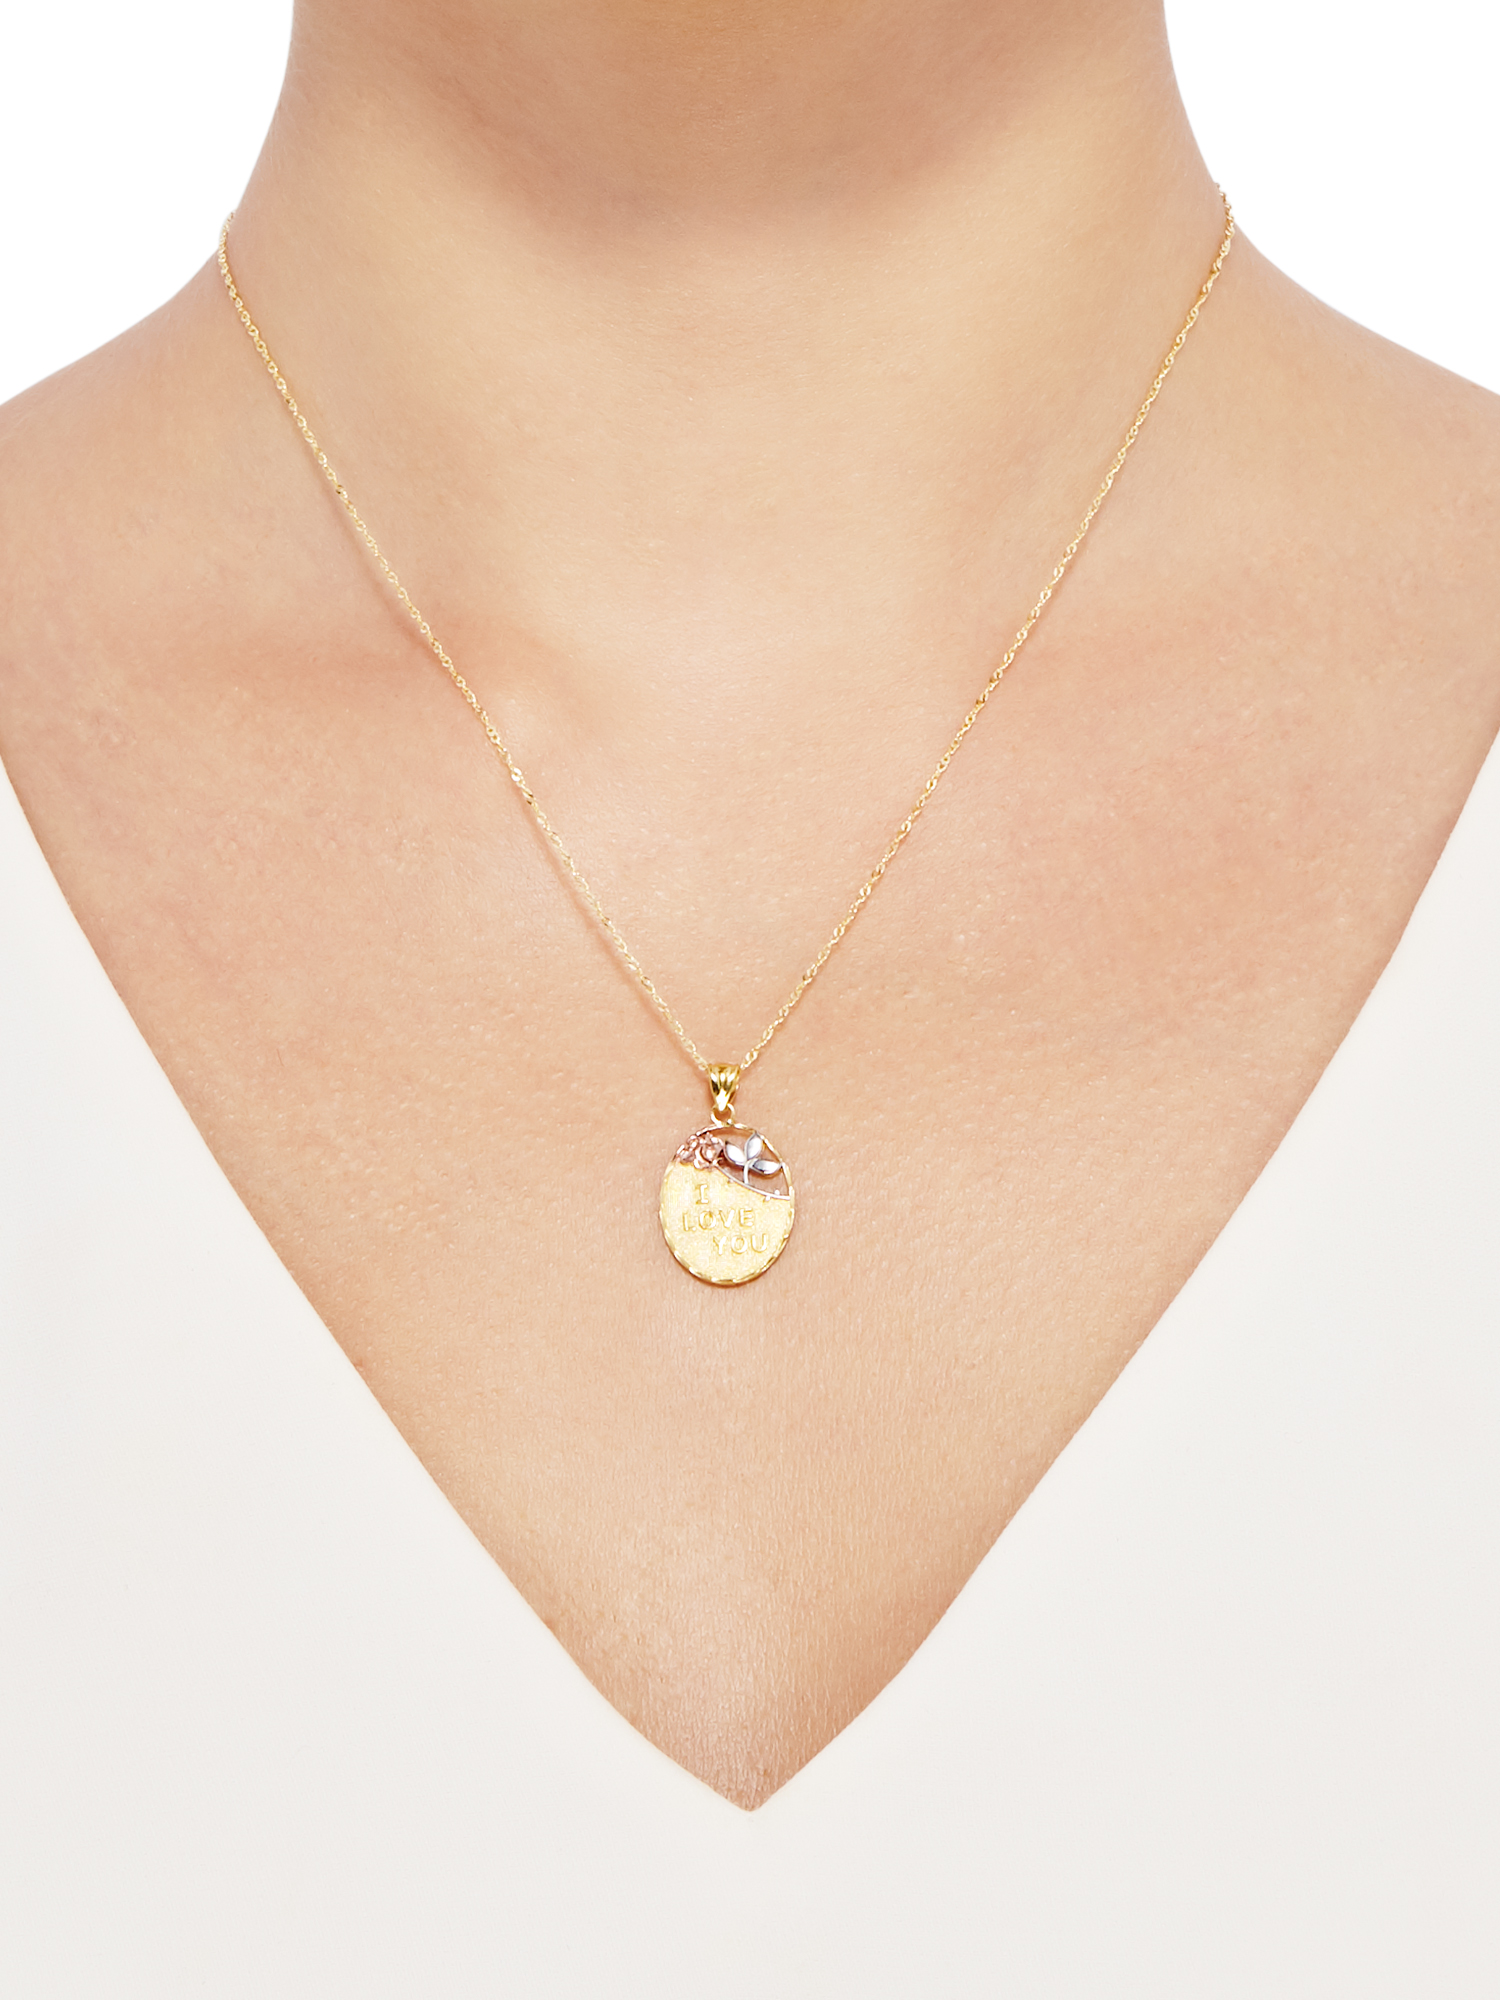 Brilliance Fine Jewelry Sterling Silver and 18K Gold-Plated "I Love You" Oval Pendant, 18" Necklace - image 4 of 4